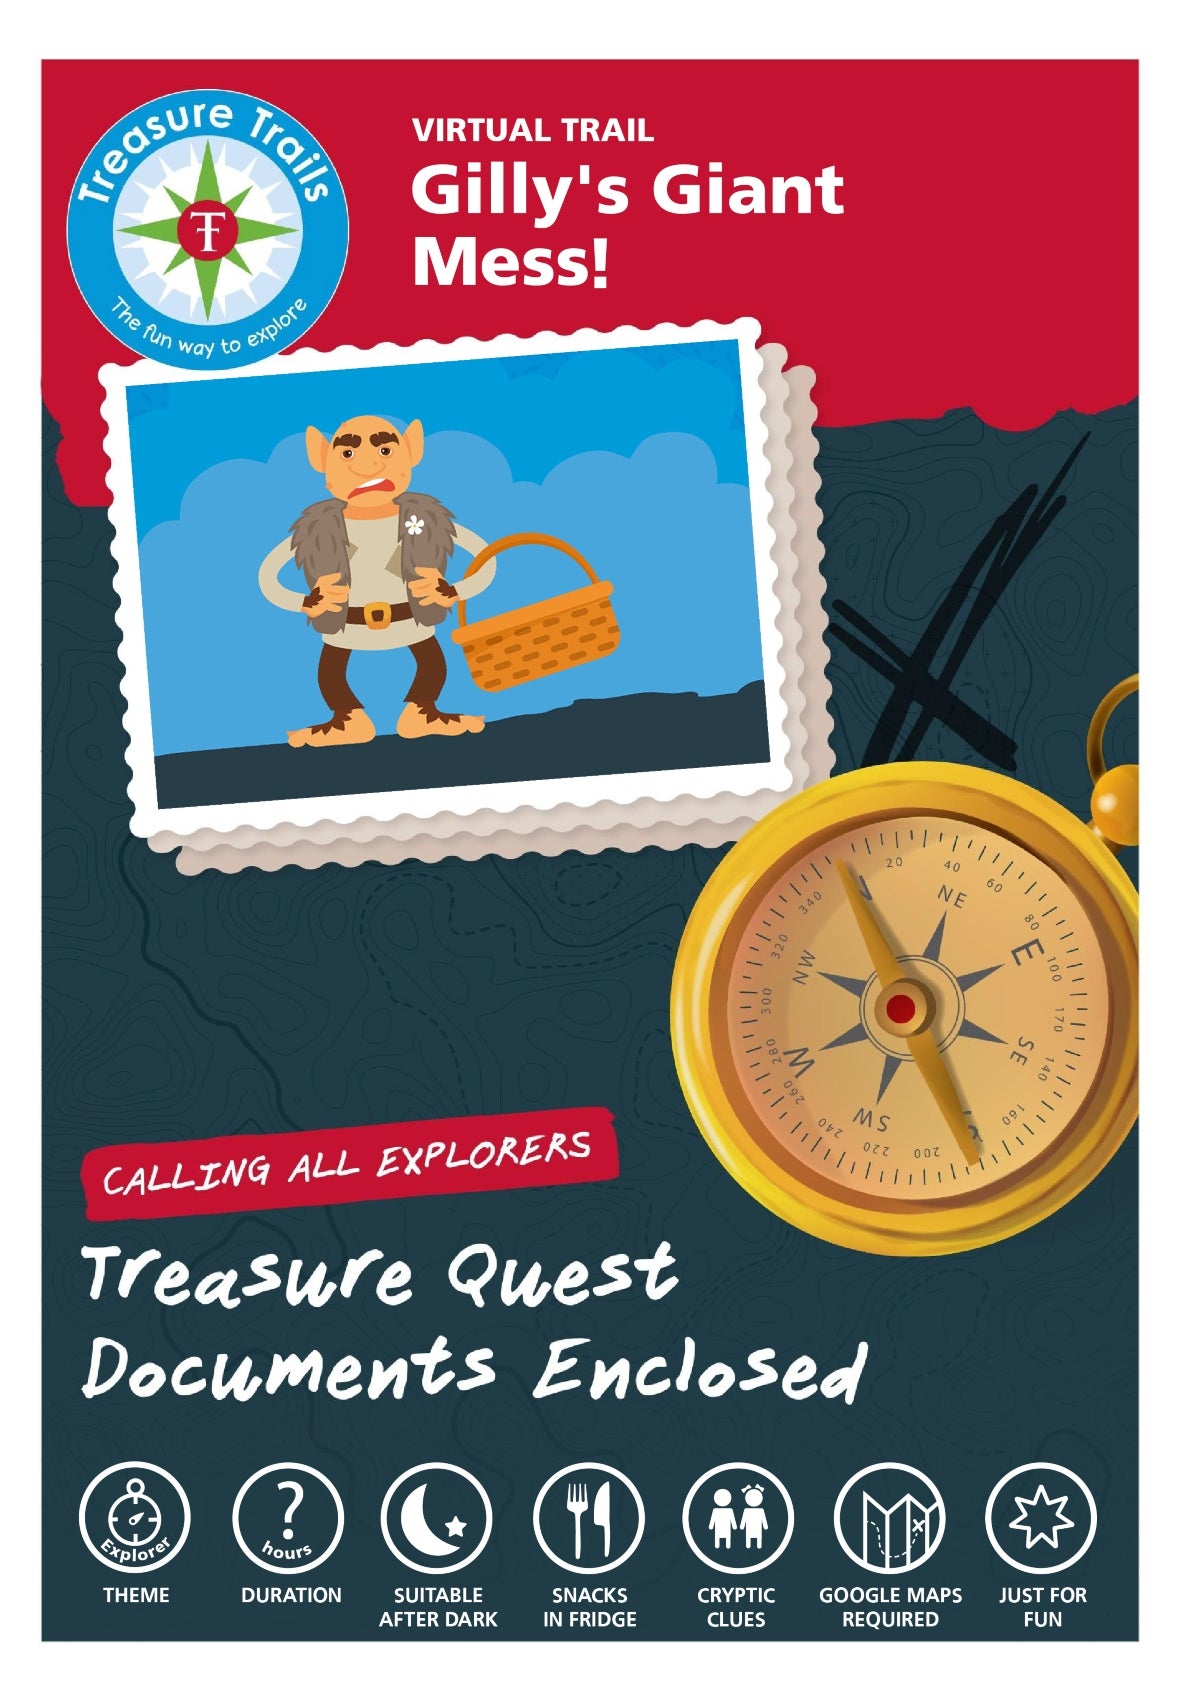 Gilly's Giant Mess! Virtual Treasure Trail